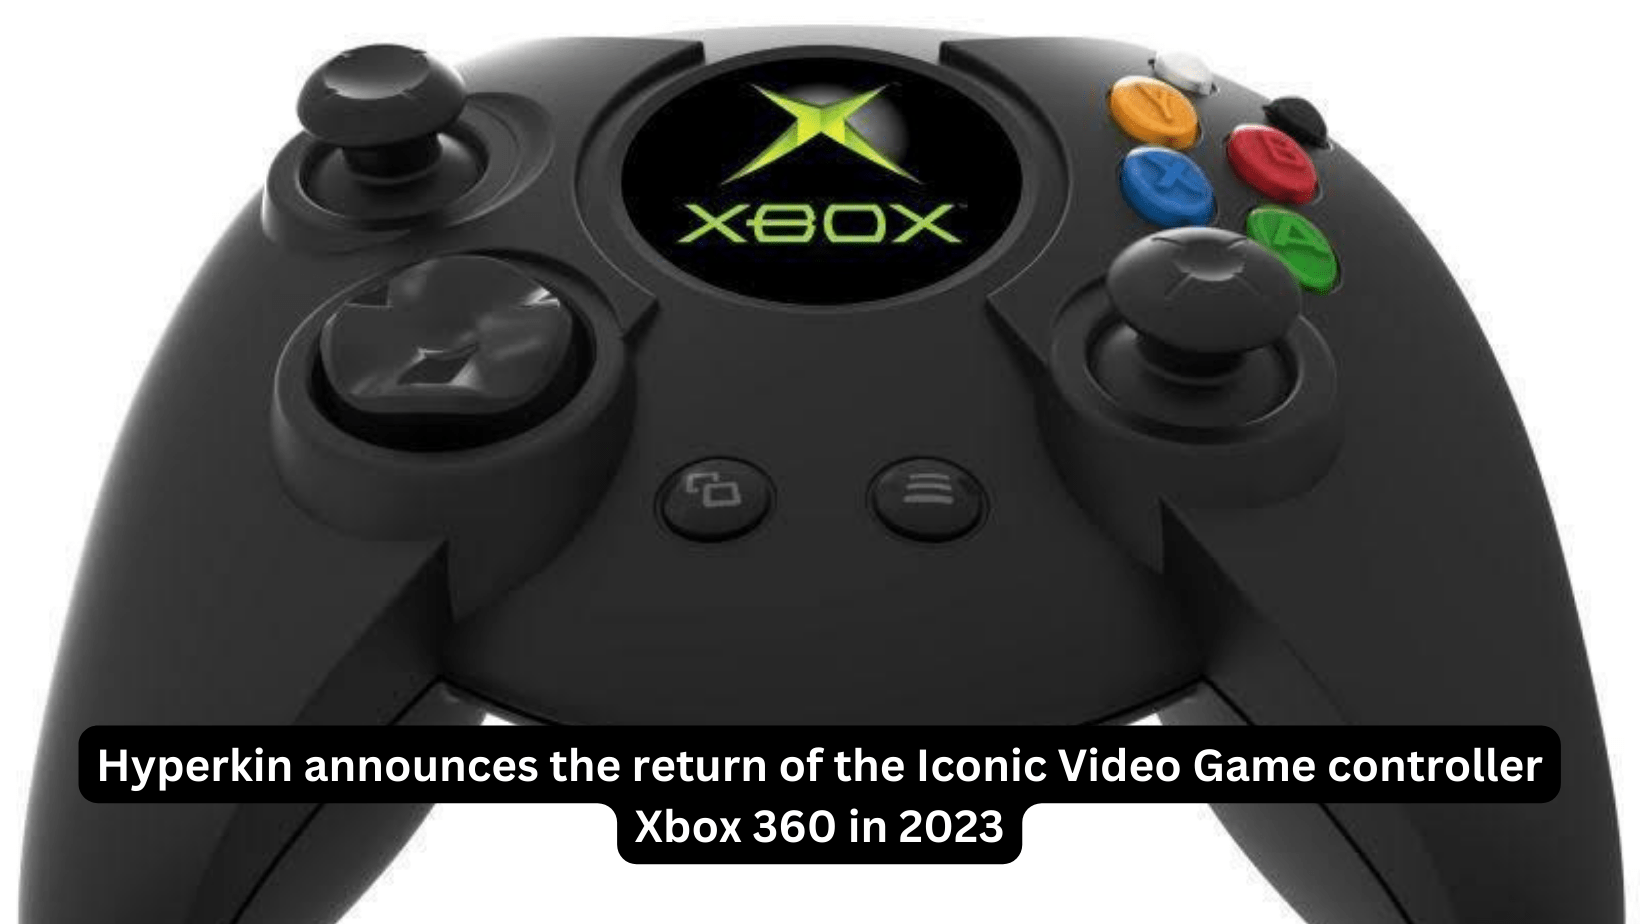 Hyperkin announces the return of the Iconic Video Game controller Xbox 360 in 2023